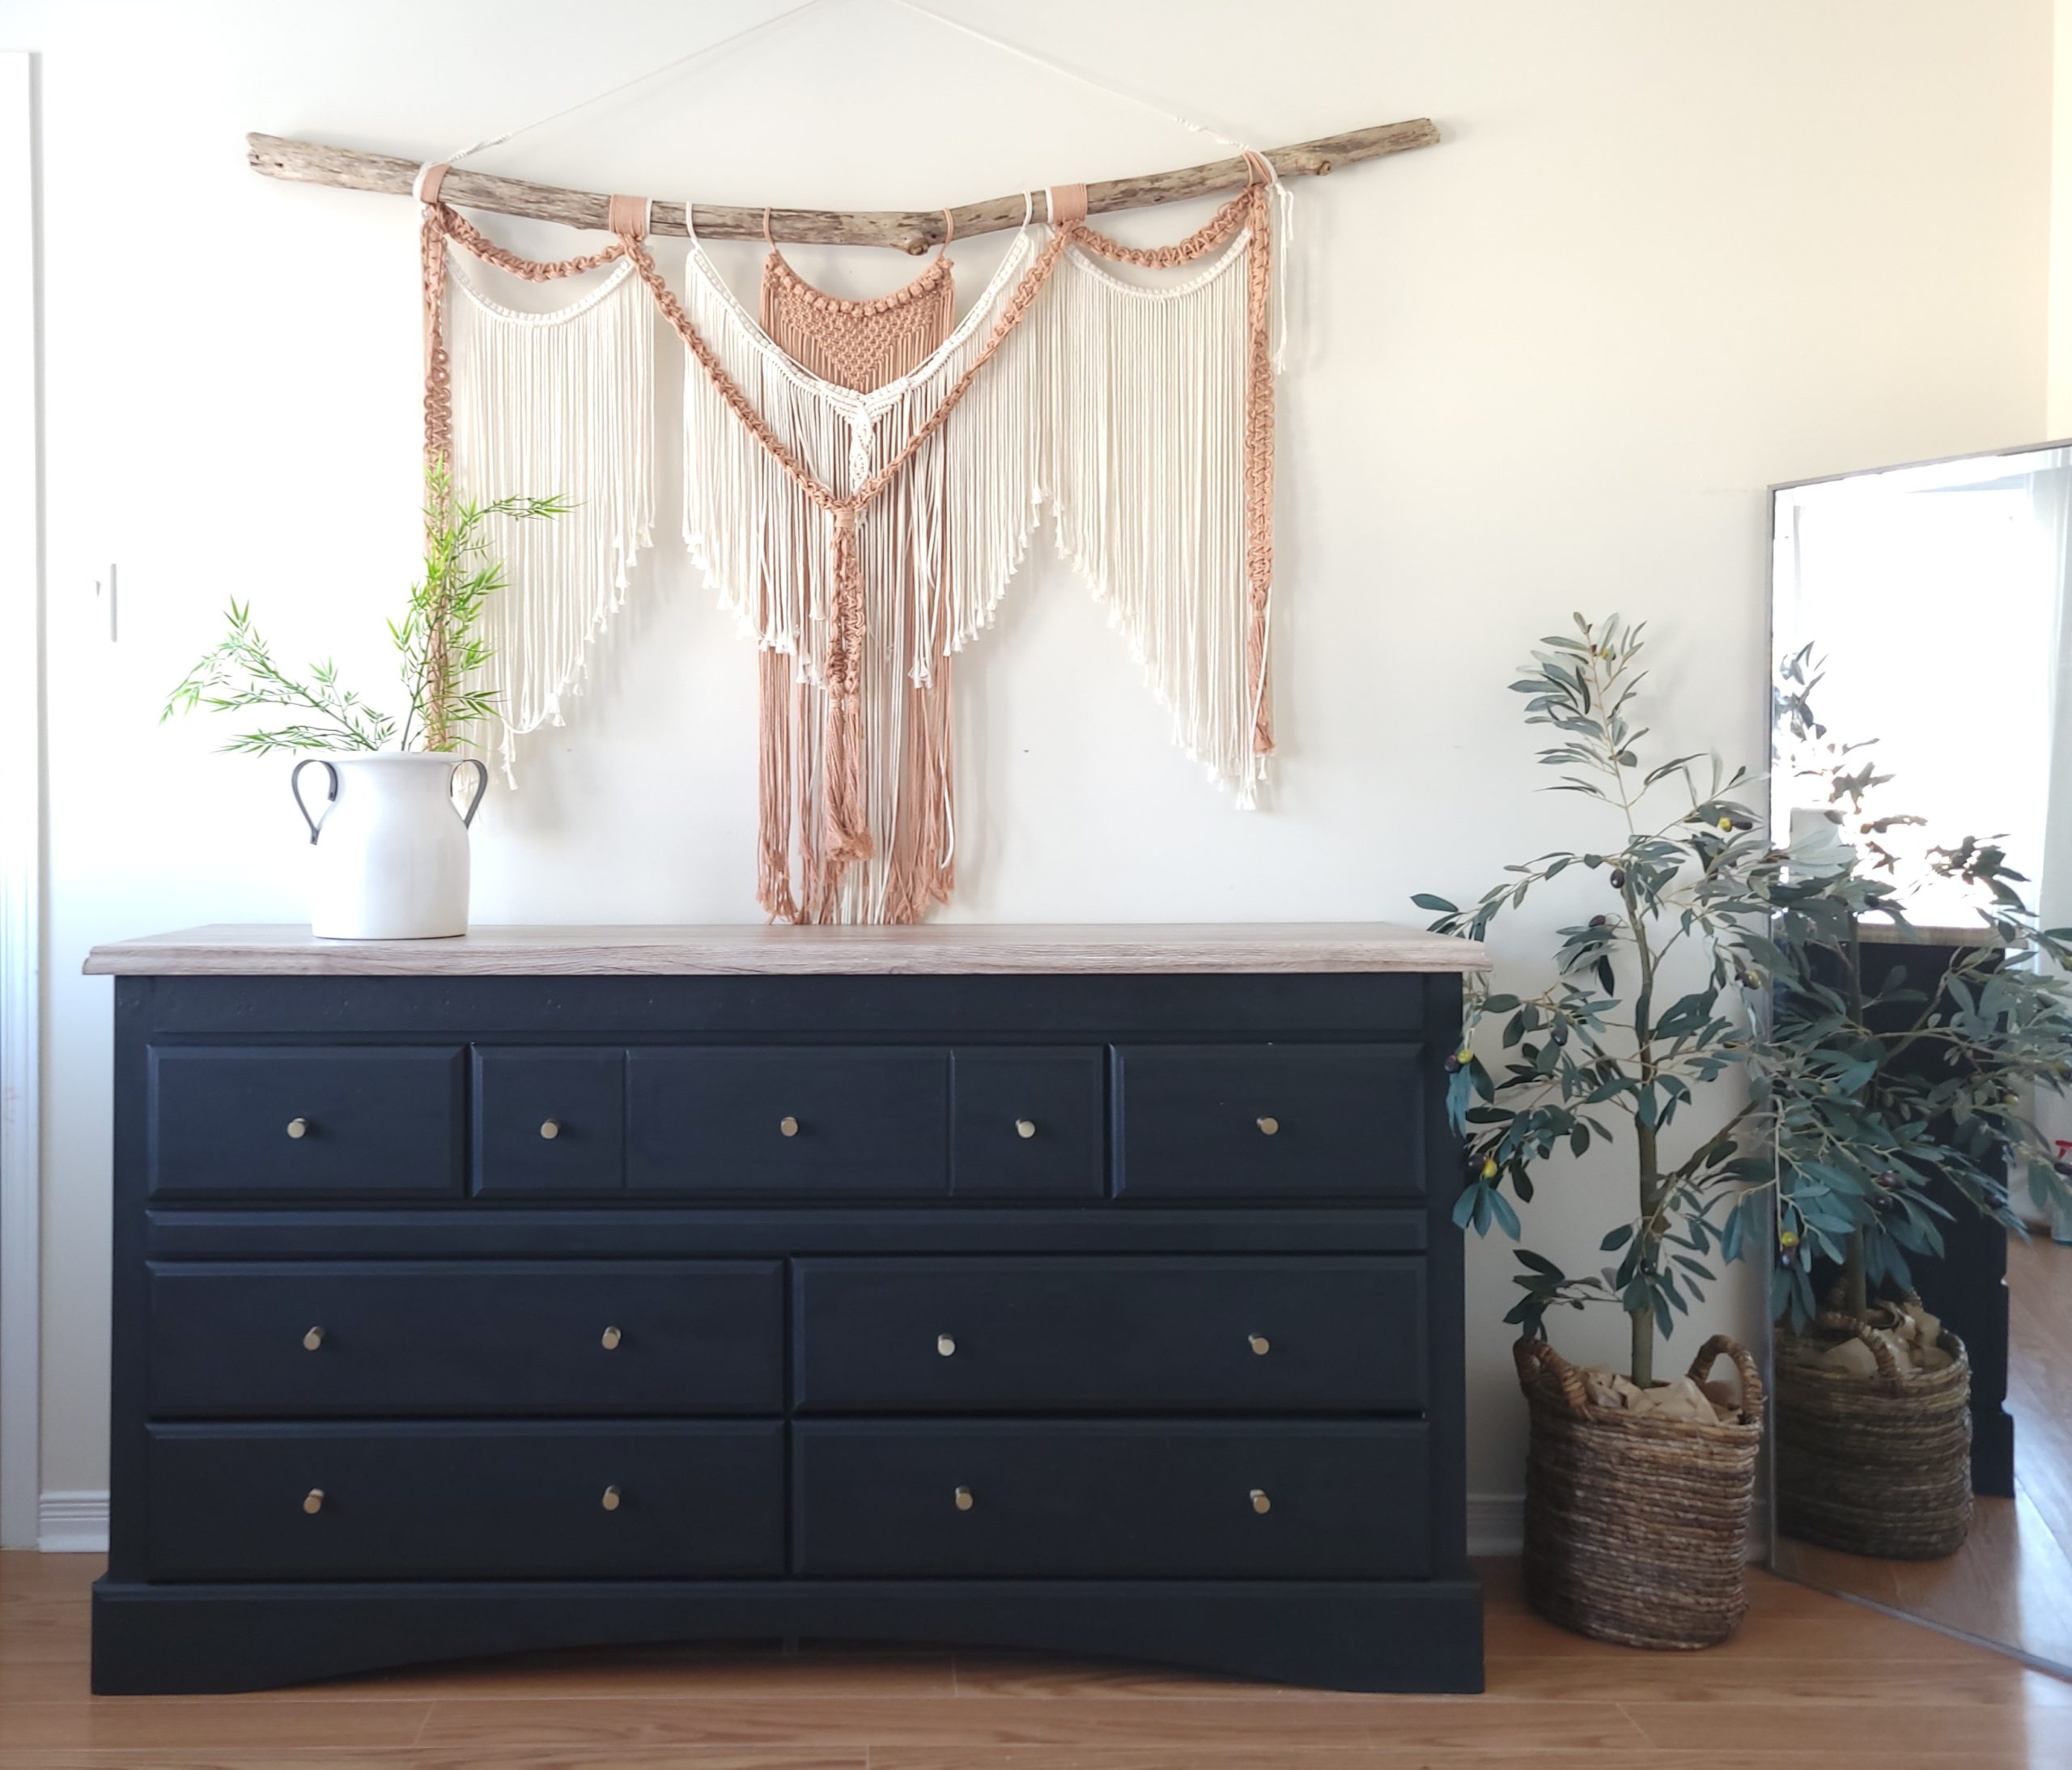 Black painted dresser with boho macrame wall hanging